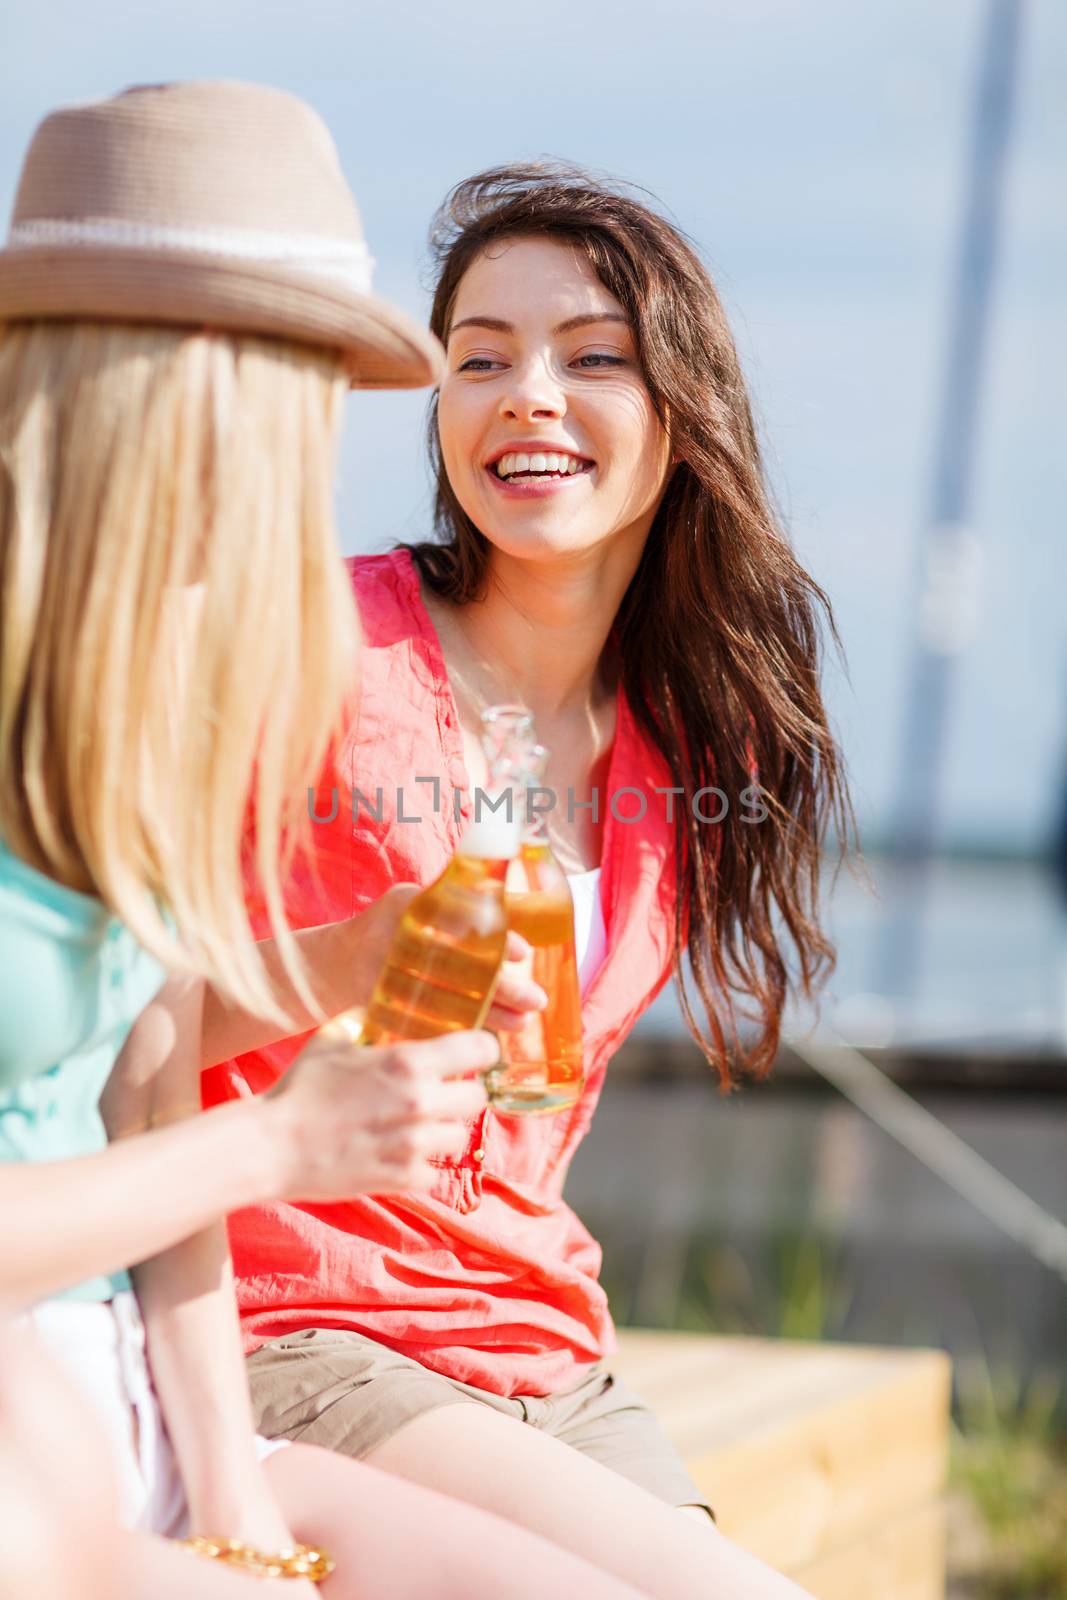 summer holidays and vacation - girls with drinks on the beach